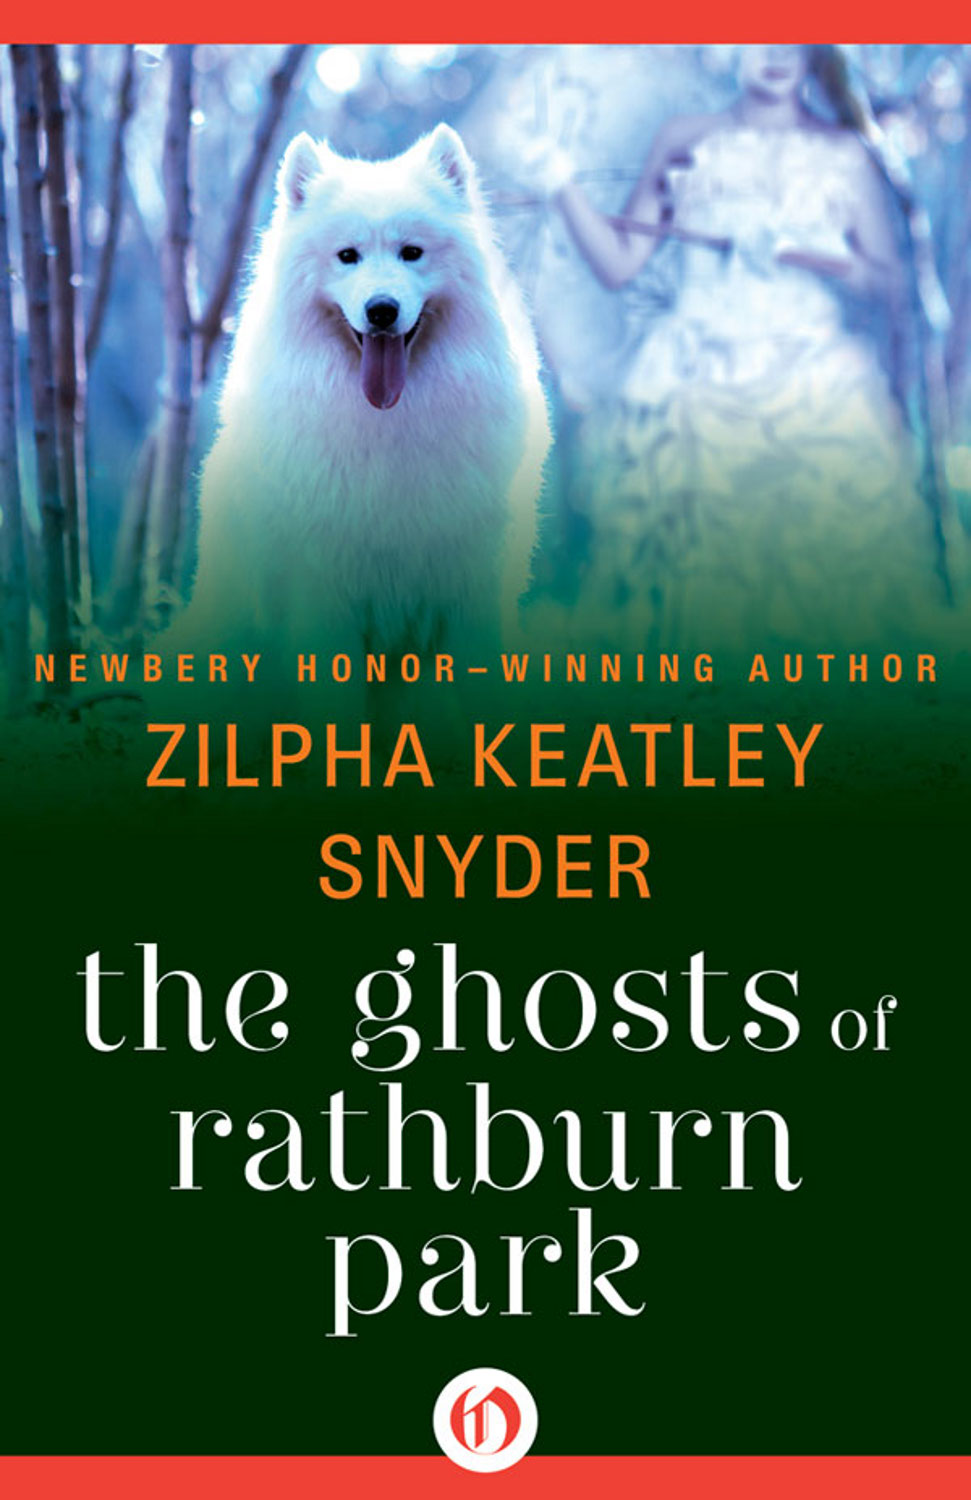 Ghosts of Rathburn Park by Zilpha Keatley Snyder